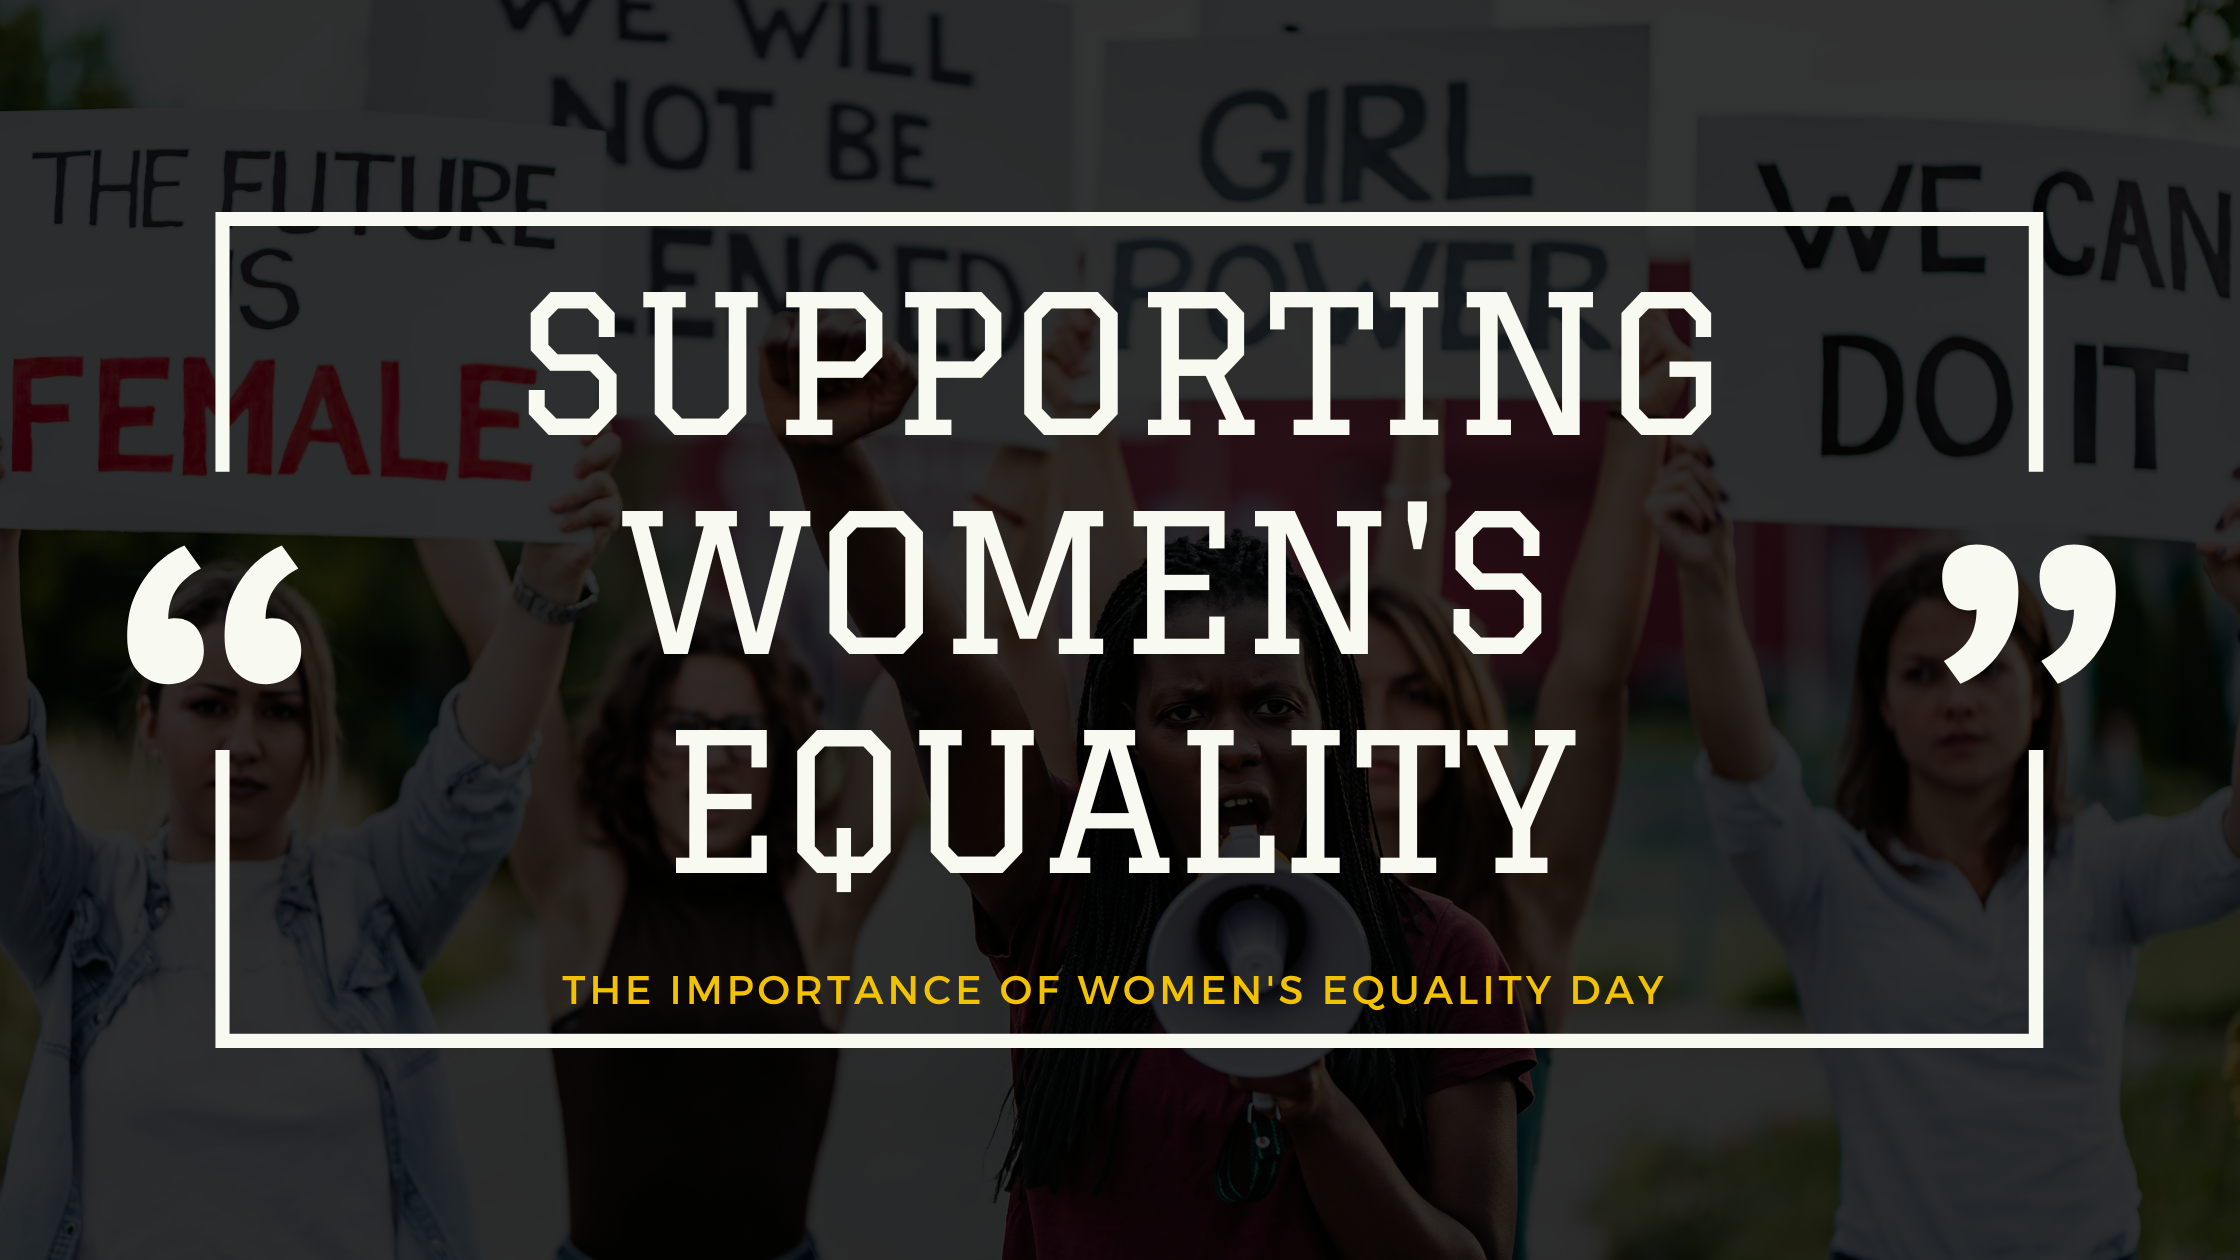 What is Women's Equality Day?